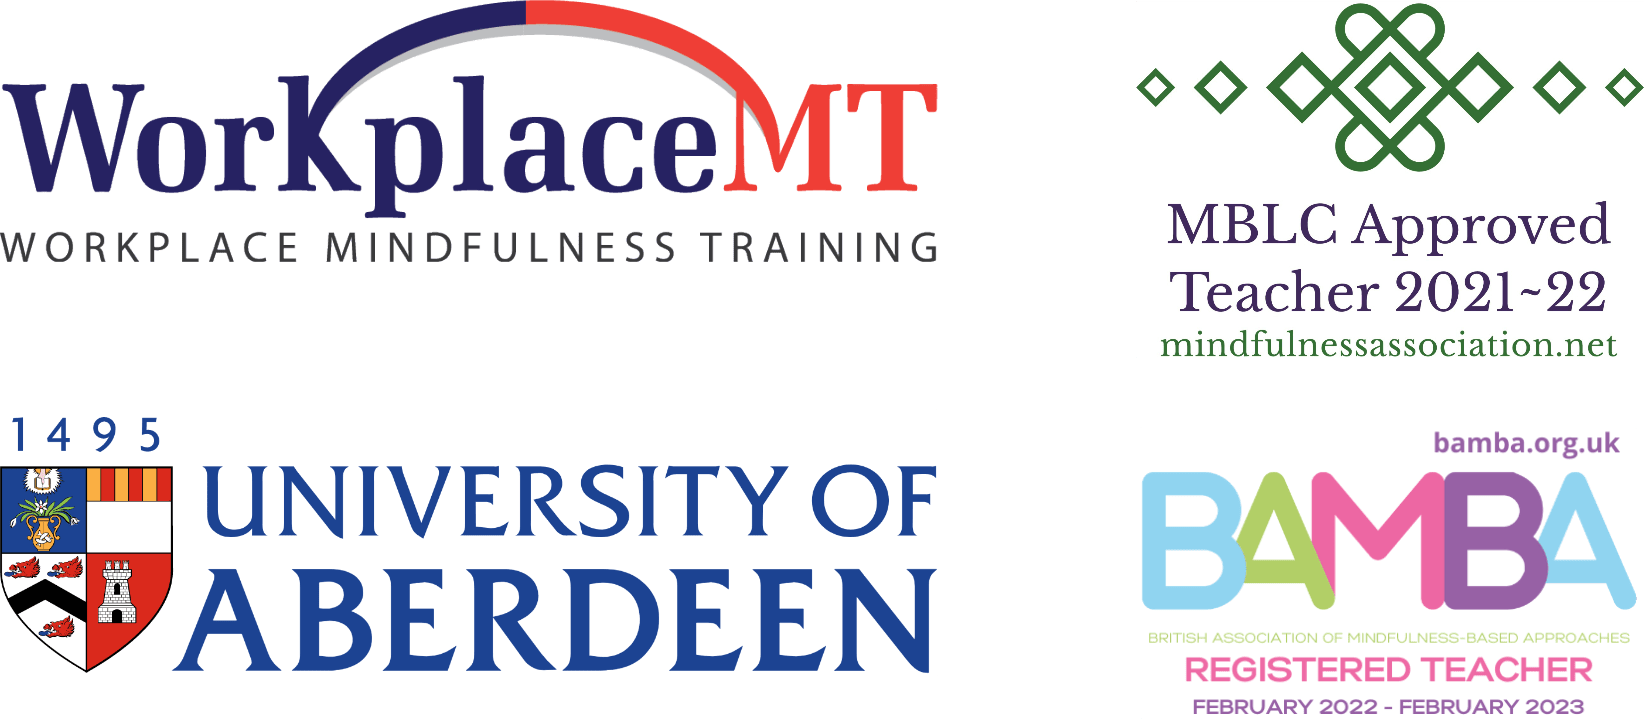 Logos for WorkplaceMT, Mindfulness Association MBLC Approved Teacher 2021-22, University of Aberdeen and BAMBA